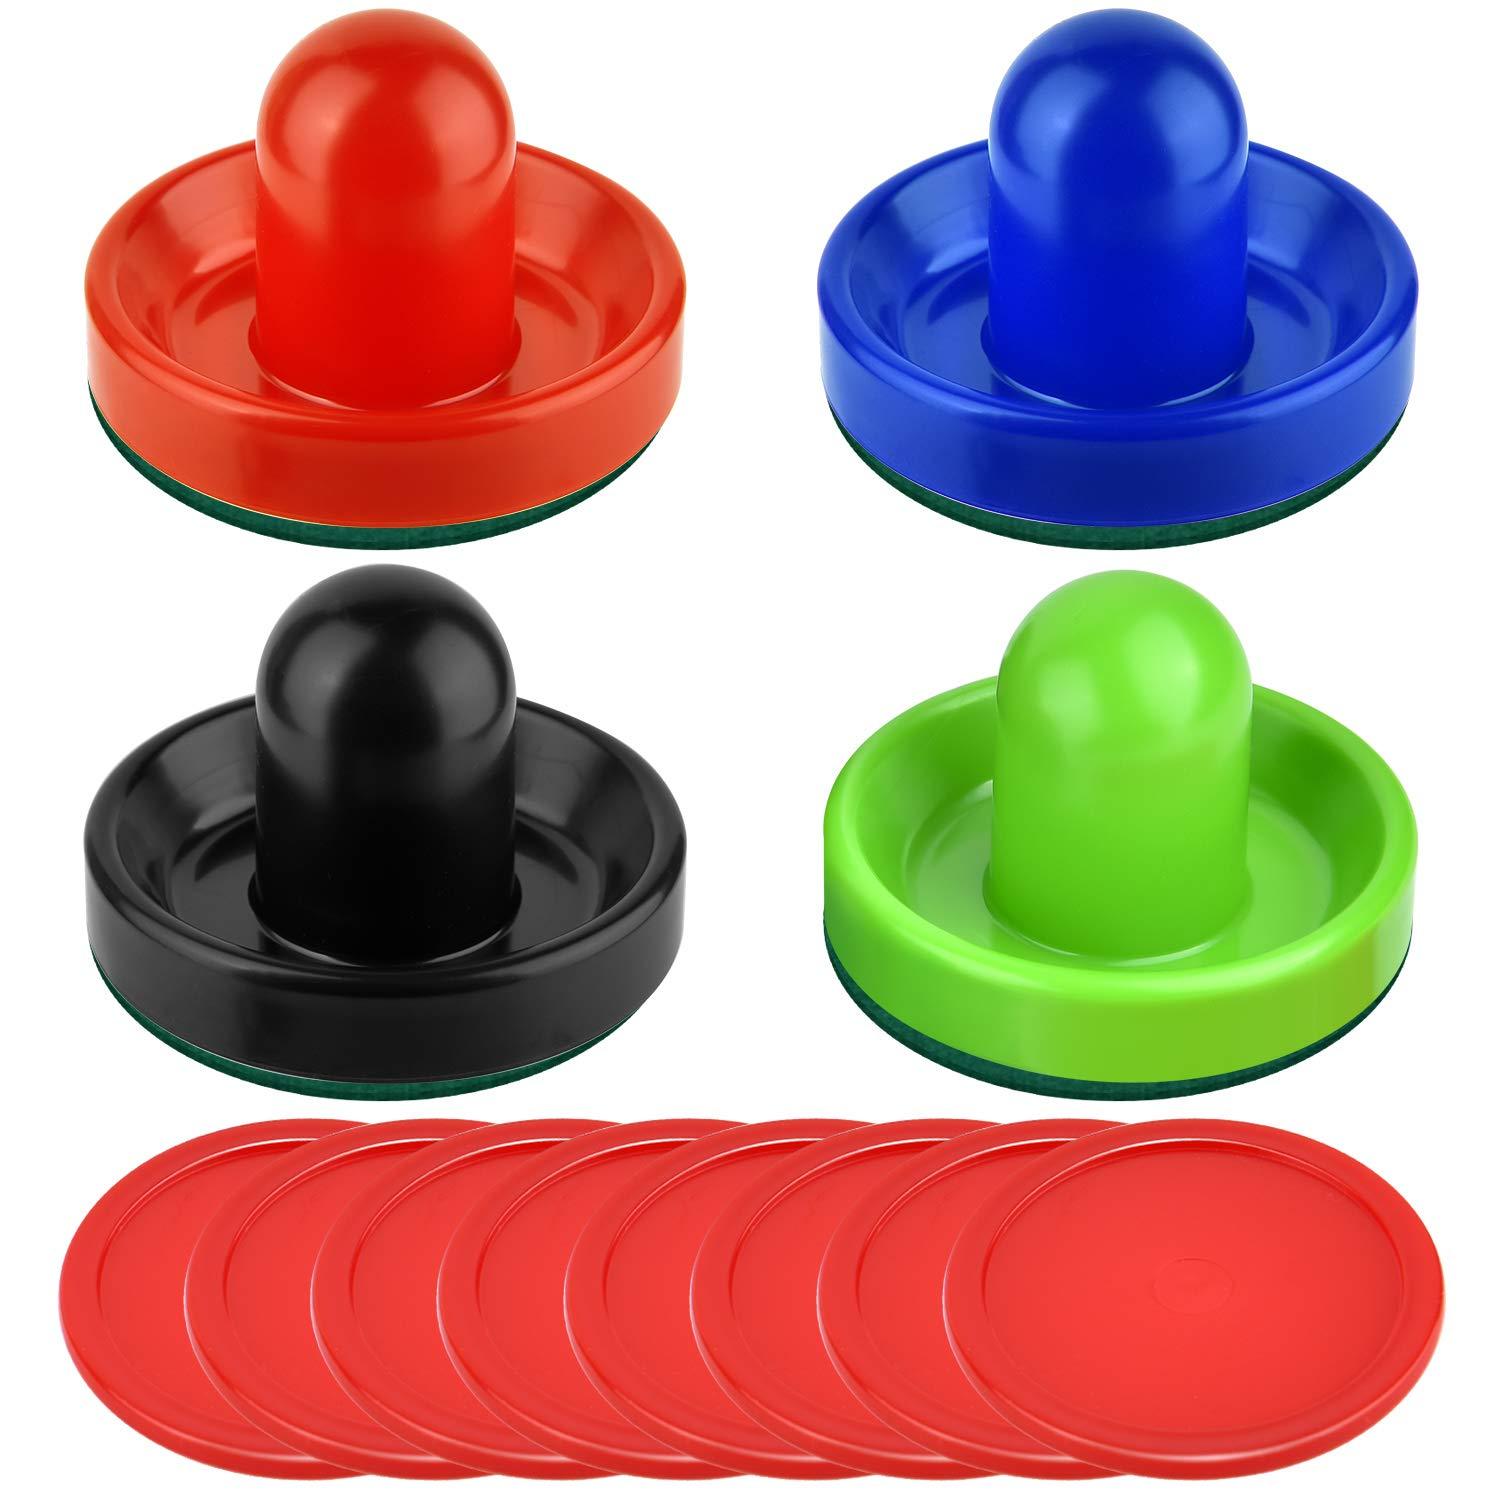 10 Red Pucks and 10 Green Pads 24 Pieces Air Hockey Pucks and Paddles Air Hockey Pushers Goal Handle Paddles Replacement Accessories for Game Tables Include 4 Pushers 